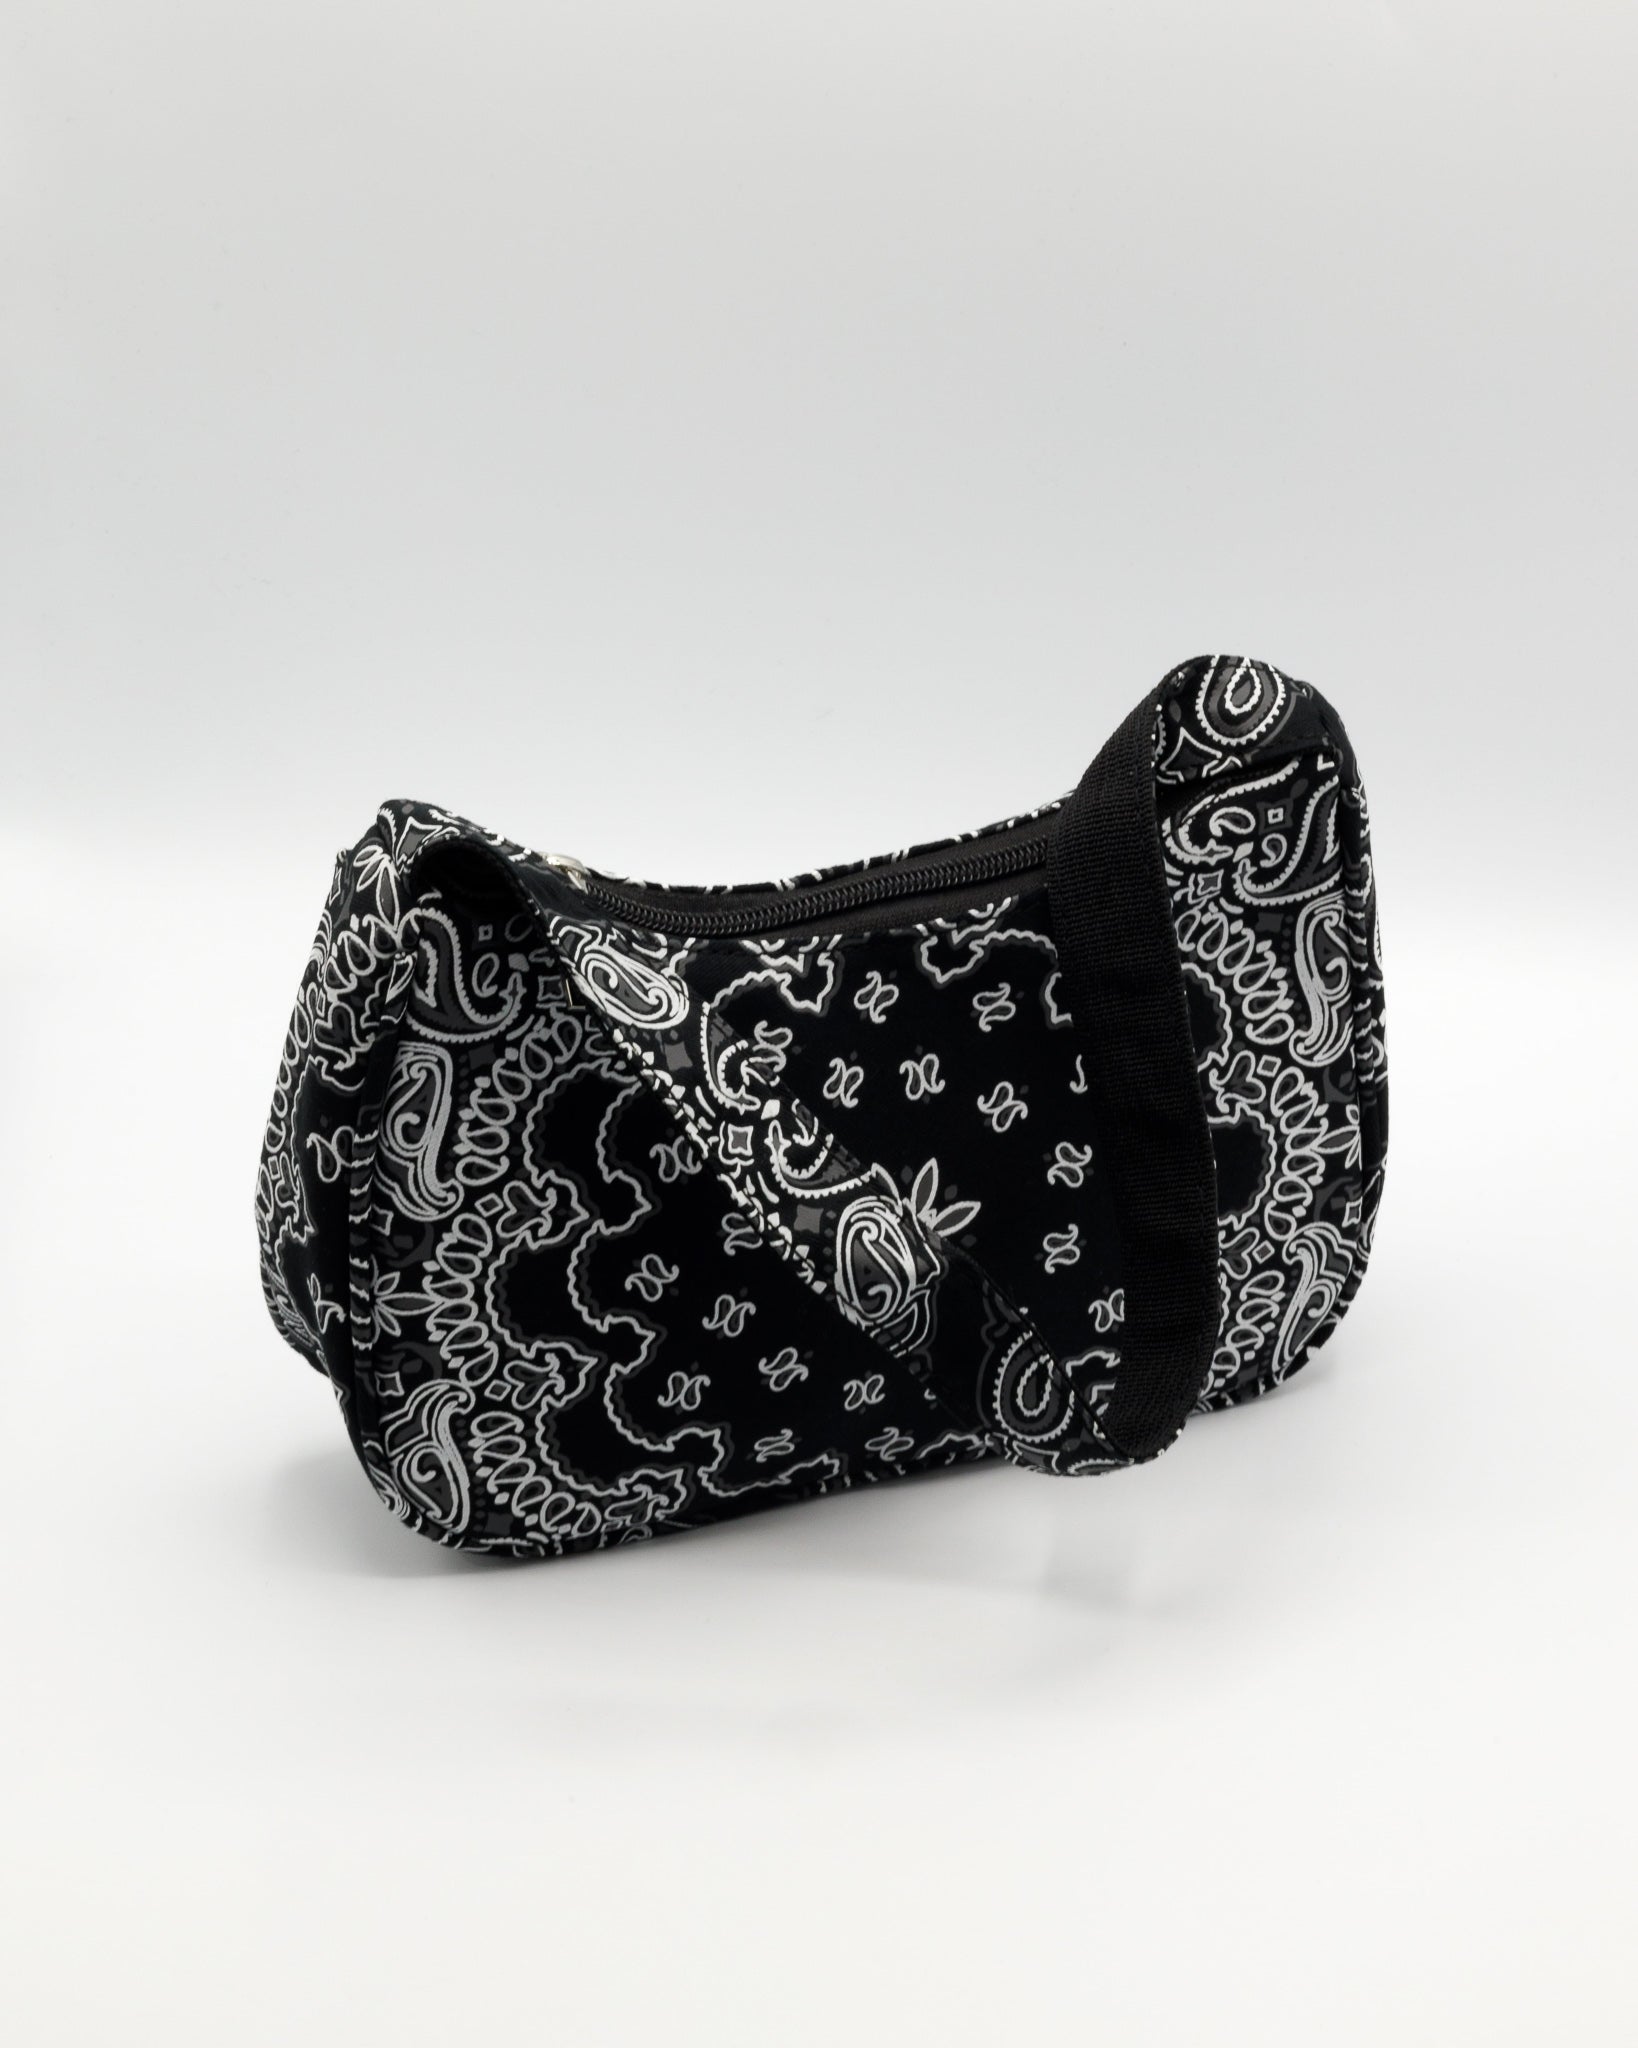 Image of Wistful Times Indie Shoulder Bag With Paisley Print In Black & White